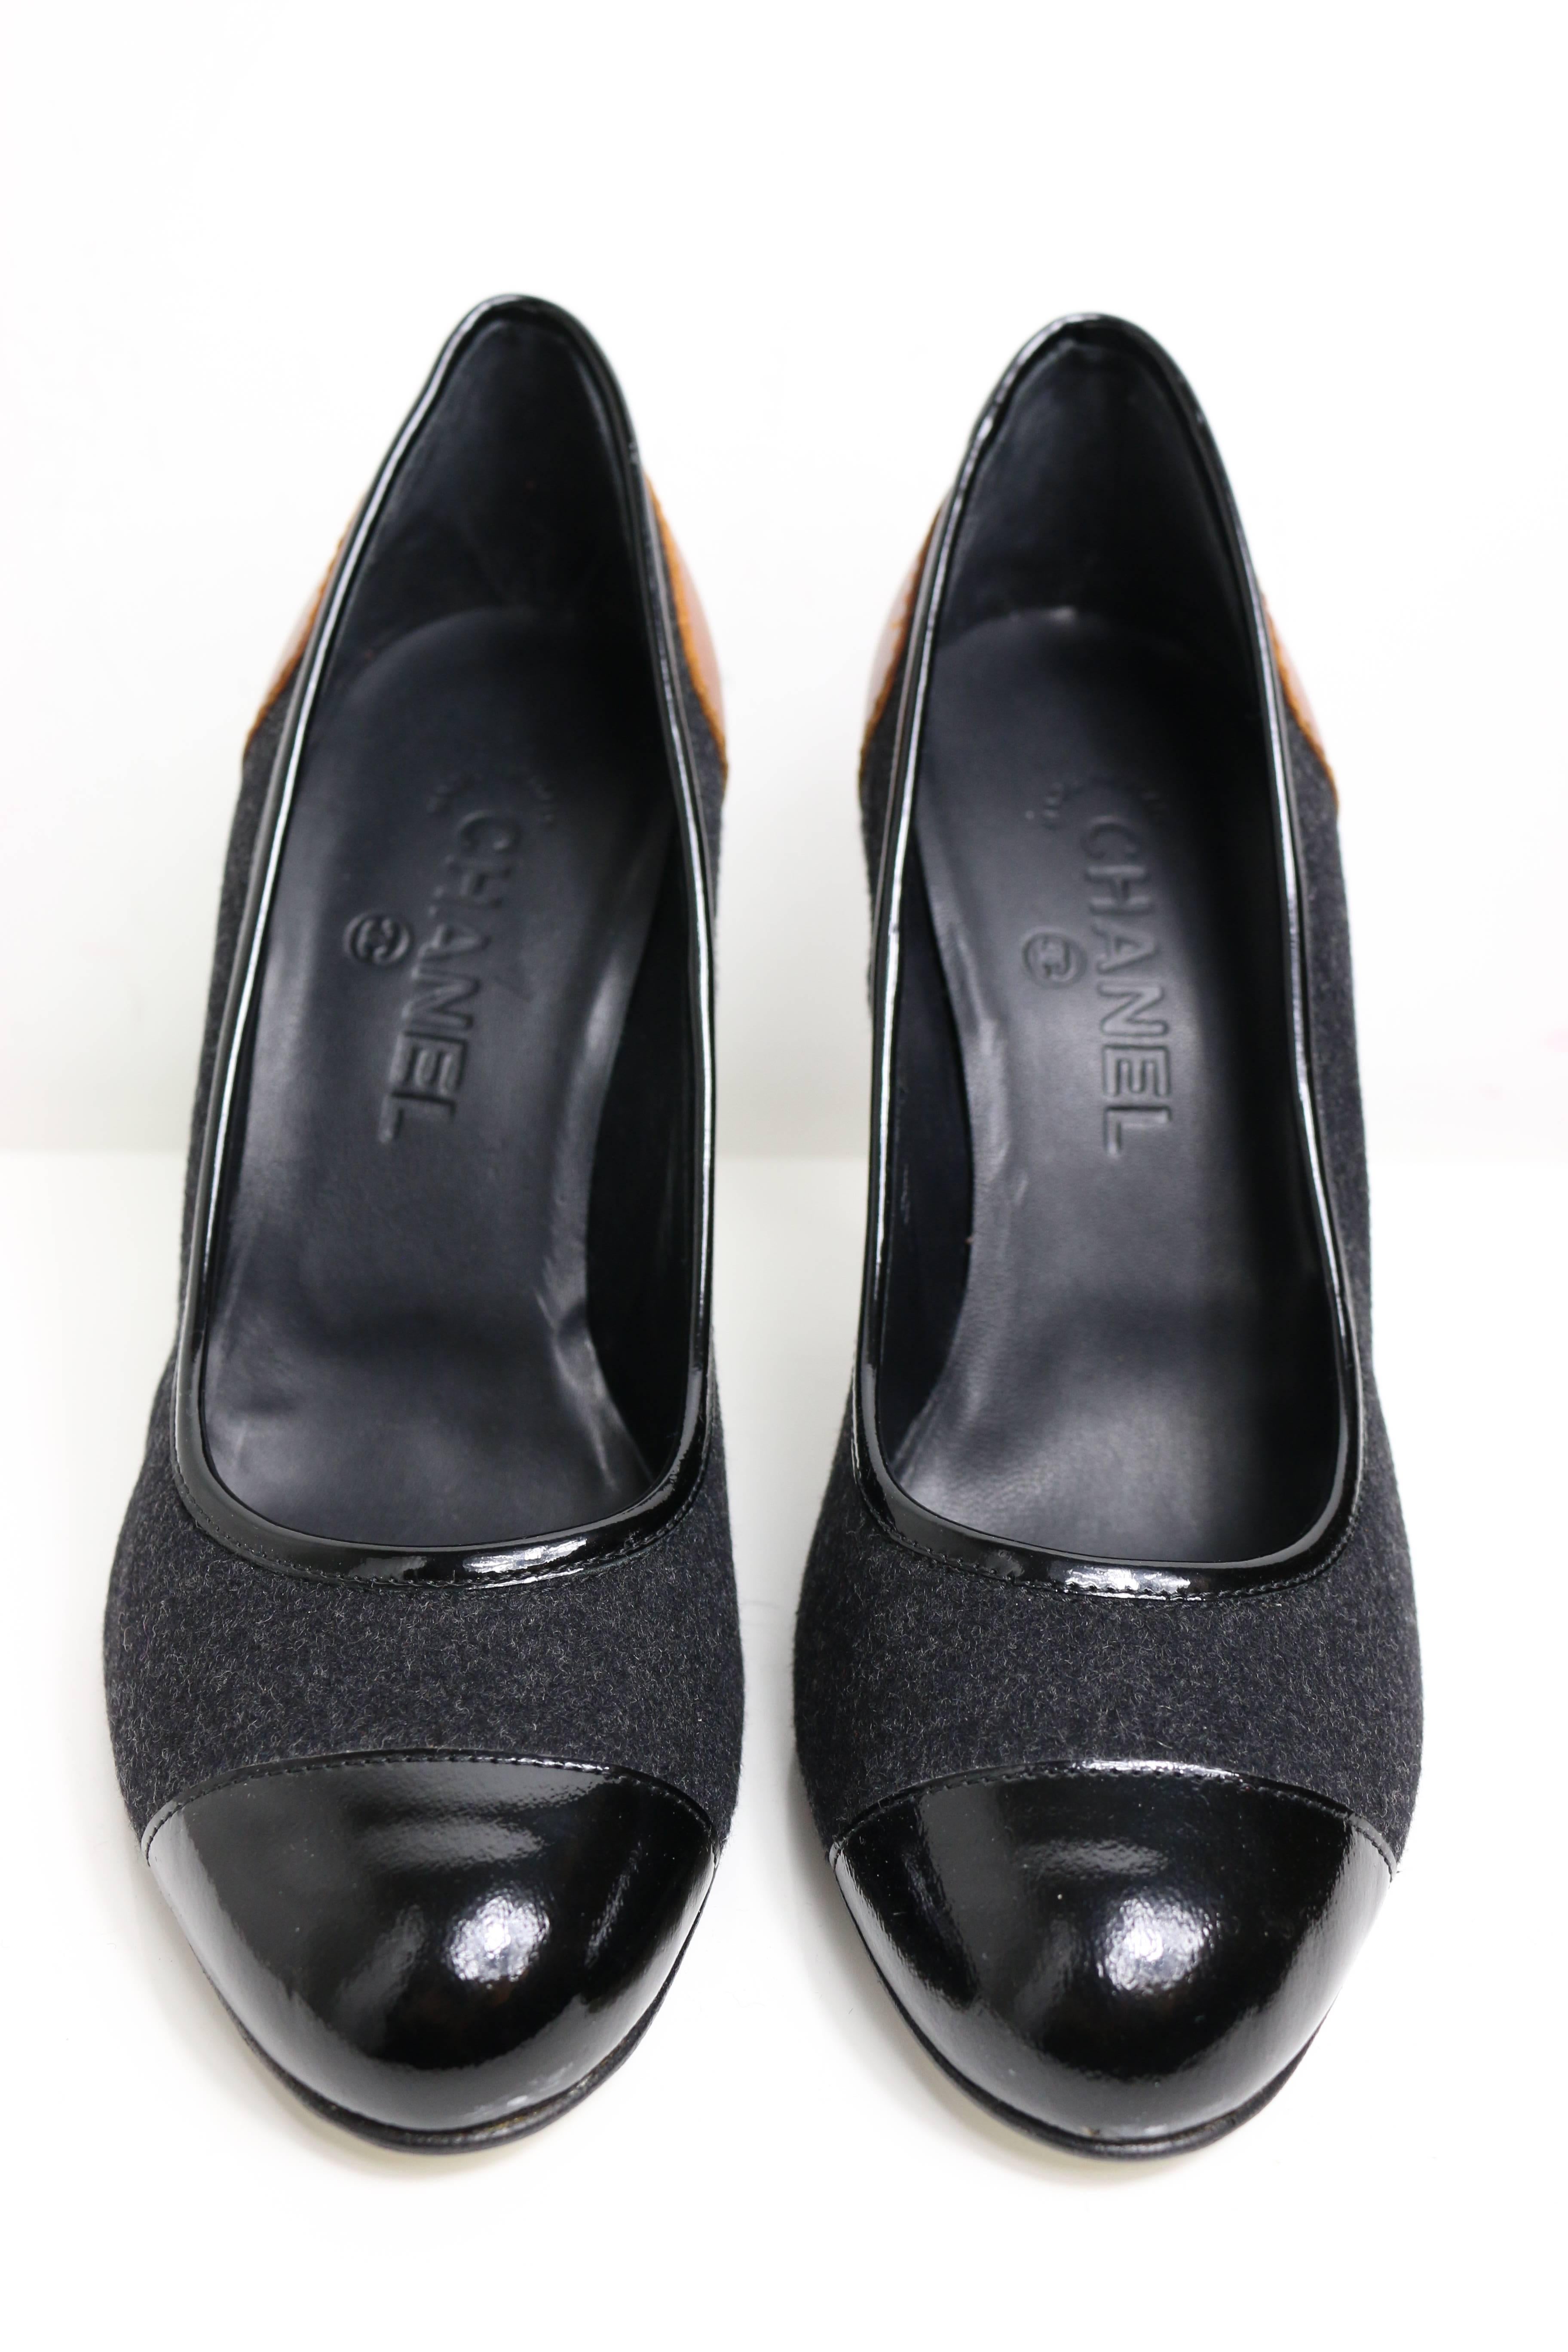 - Chanel bi-colour black patent leather/grey wool pumps with written 